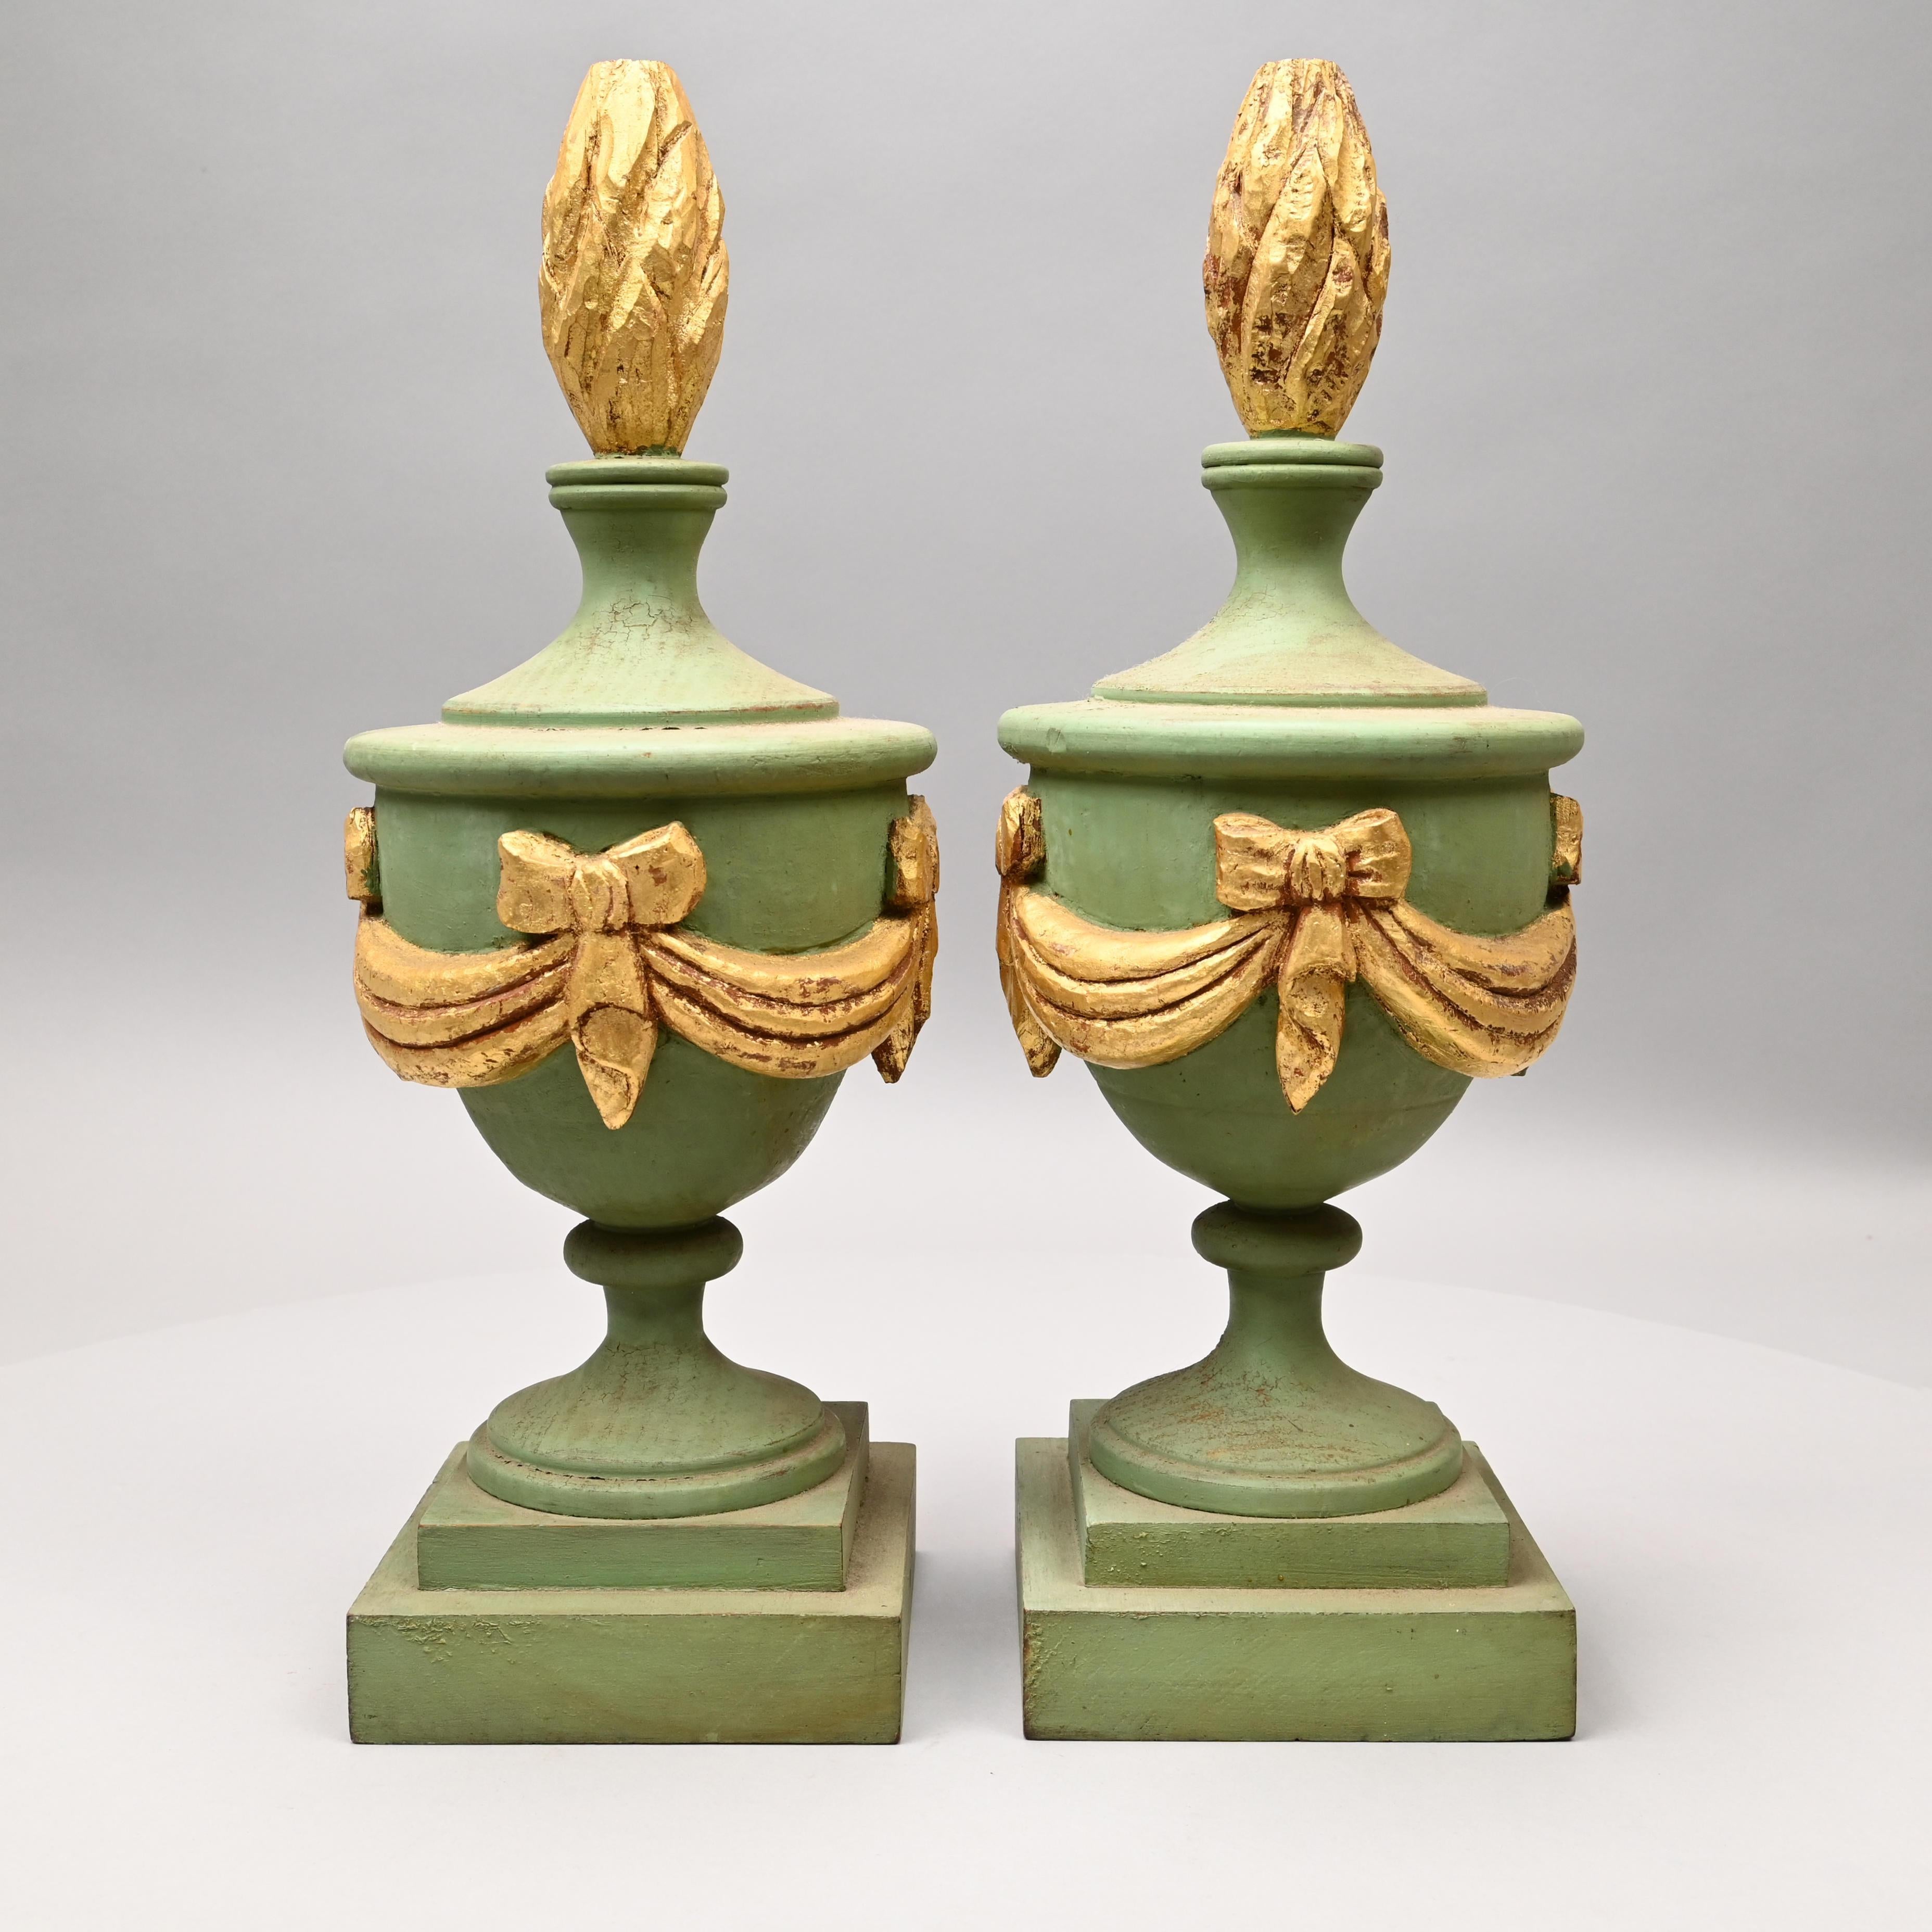 Carved Decorative Pair of Wooden Light Green and Gold Painted Architectural Finials For Sale